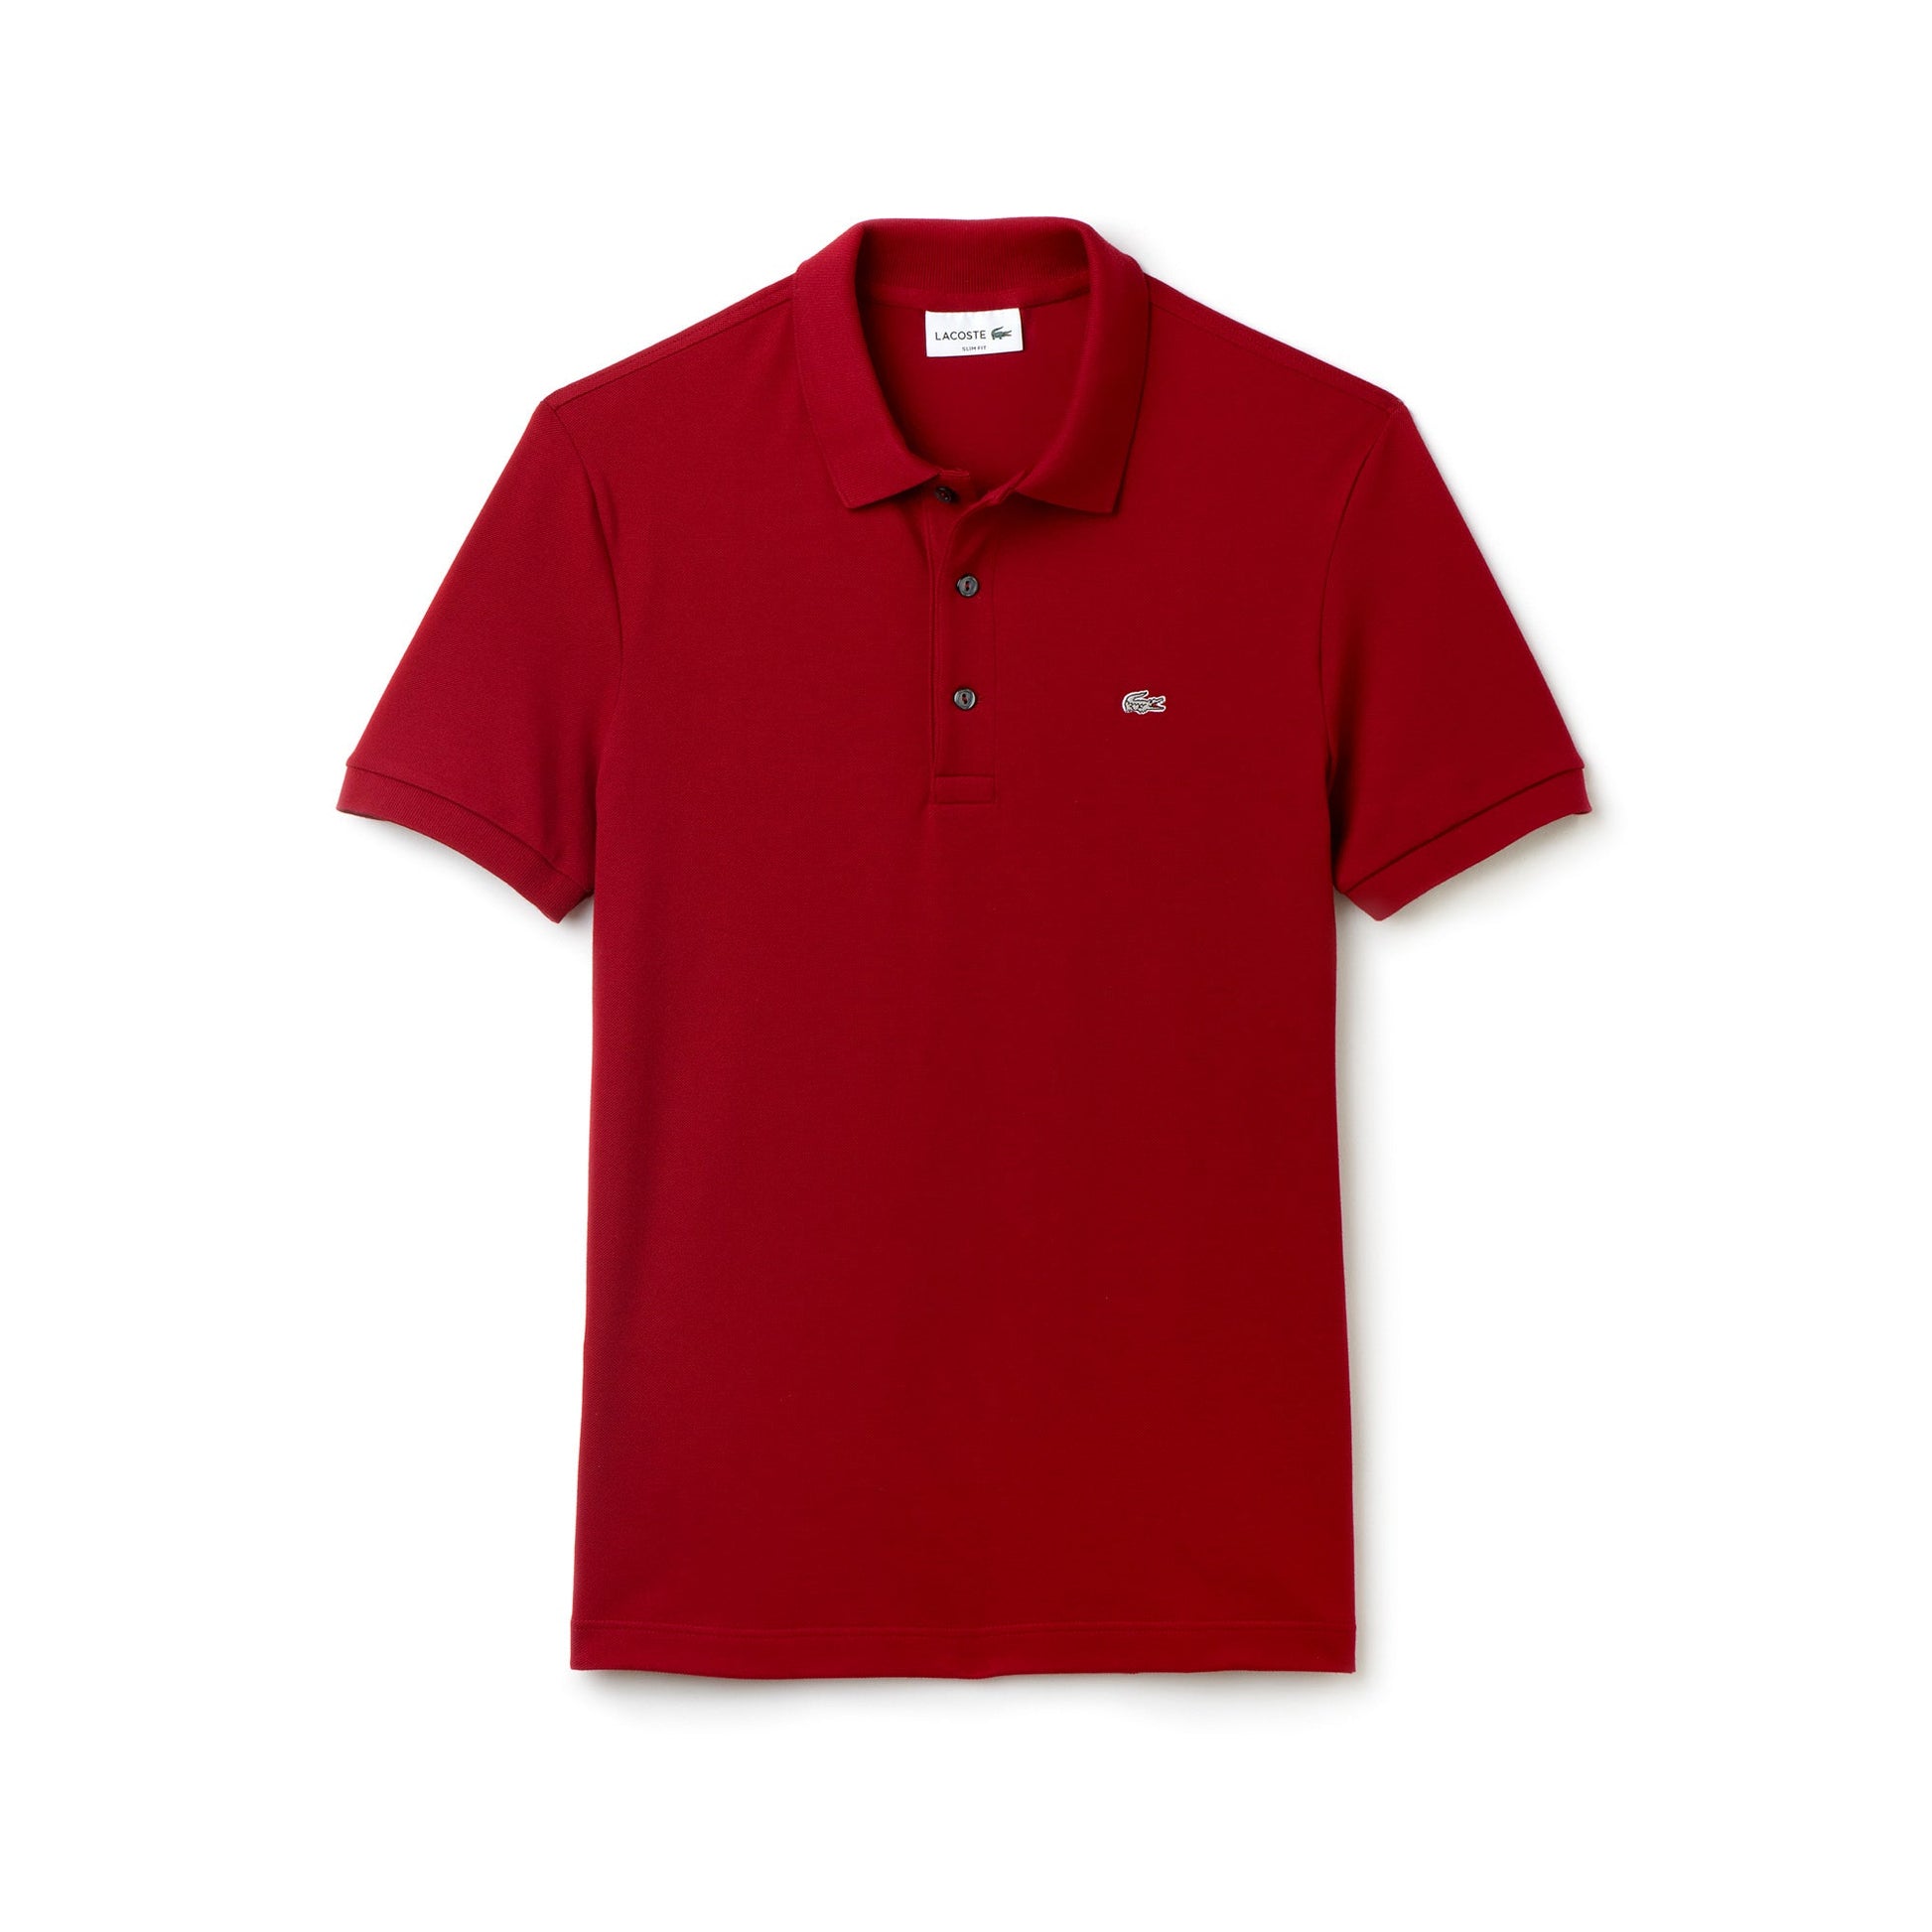 Shop The Latest Collection Of Outlet - Lacoste Men'S Slim Fit Lacoste Polo Shirt In Stretch Petit Piqu???? - Ph4014 In Lebanon